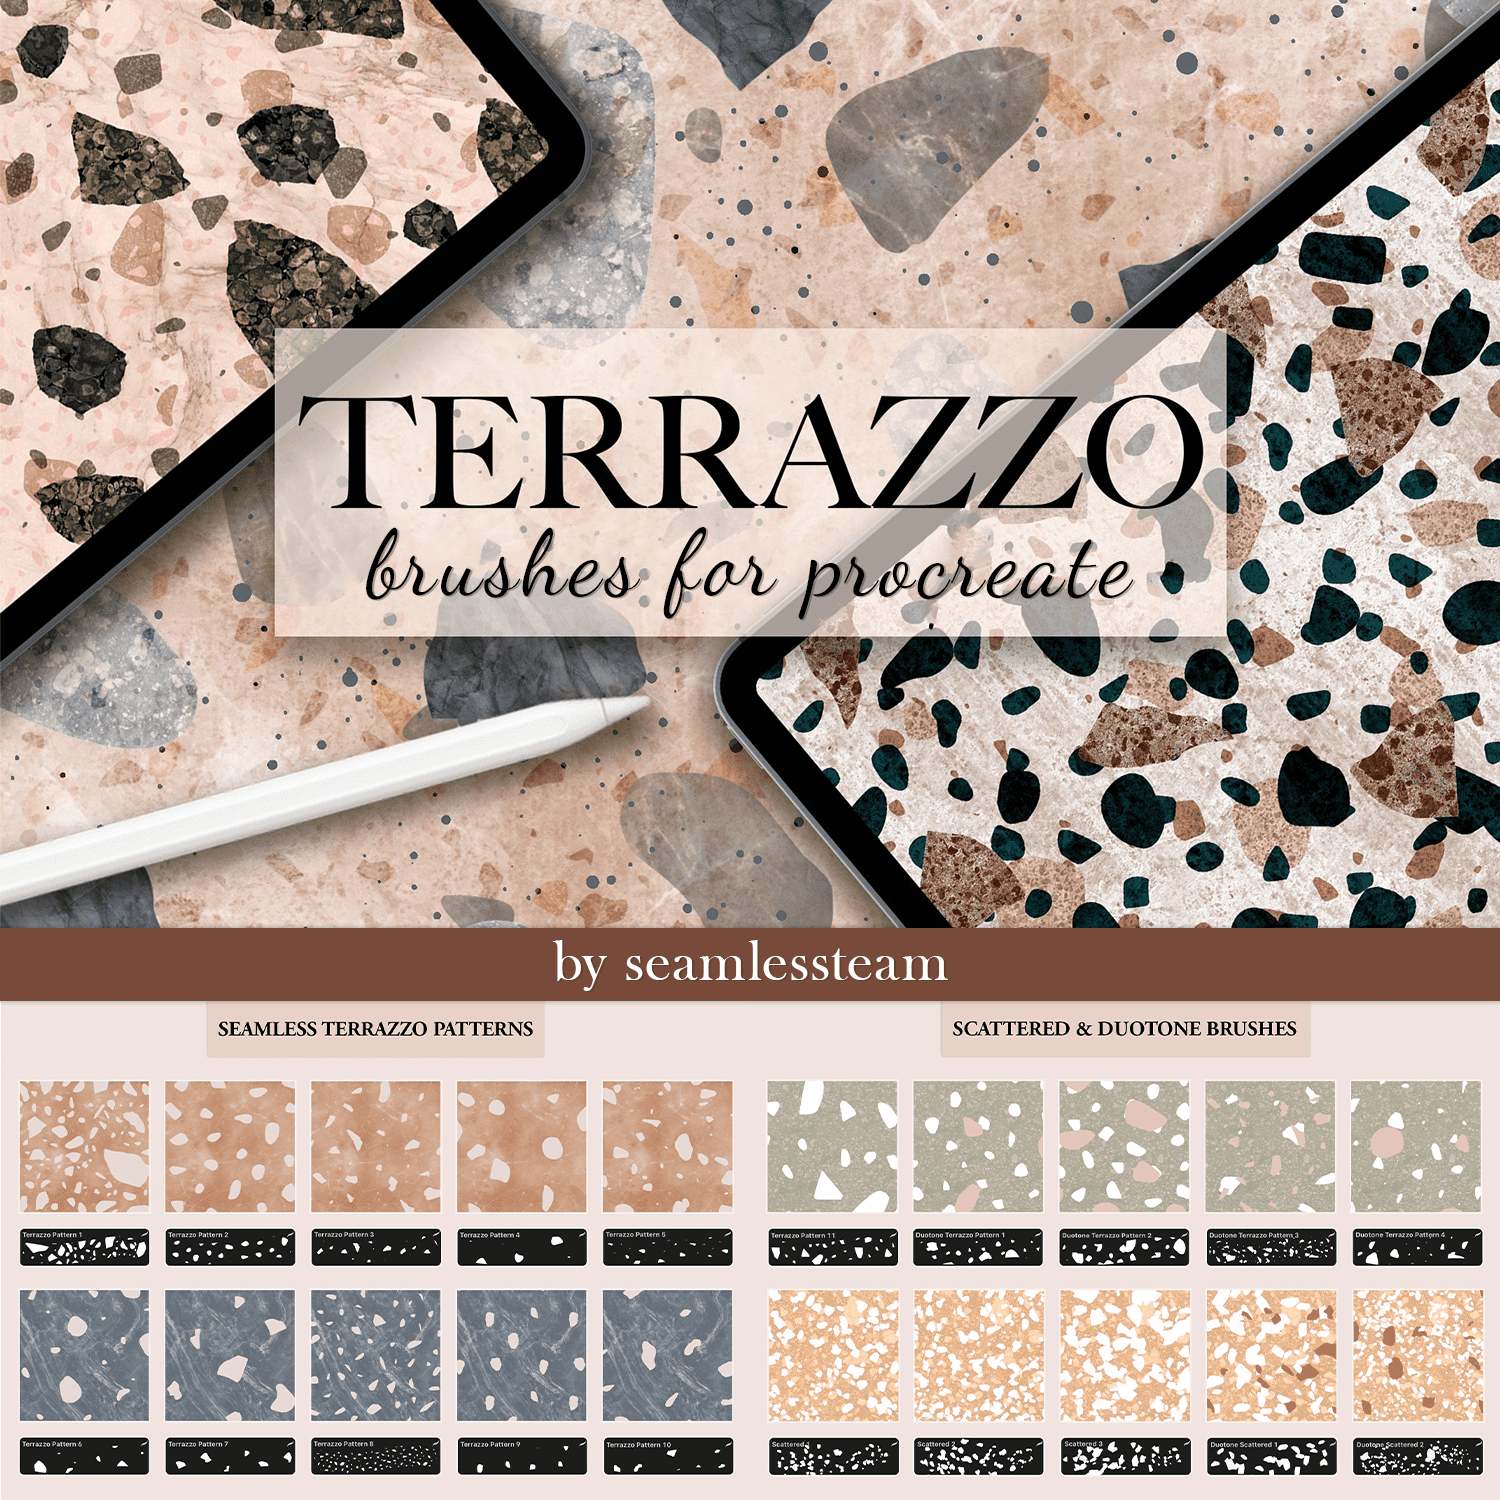 Terrazzo Brushes For Procreate - main image preview.